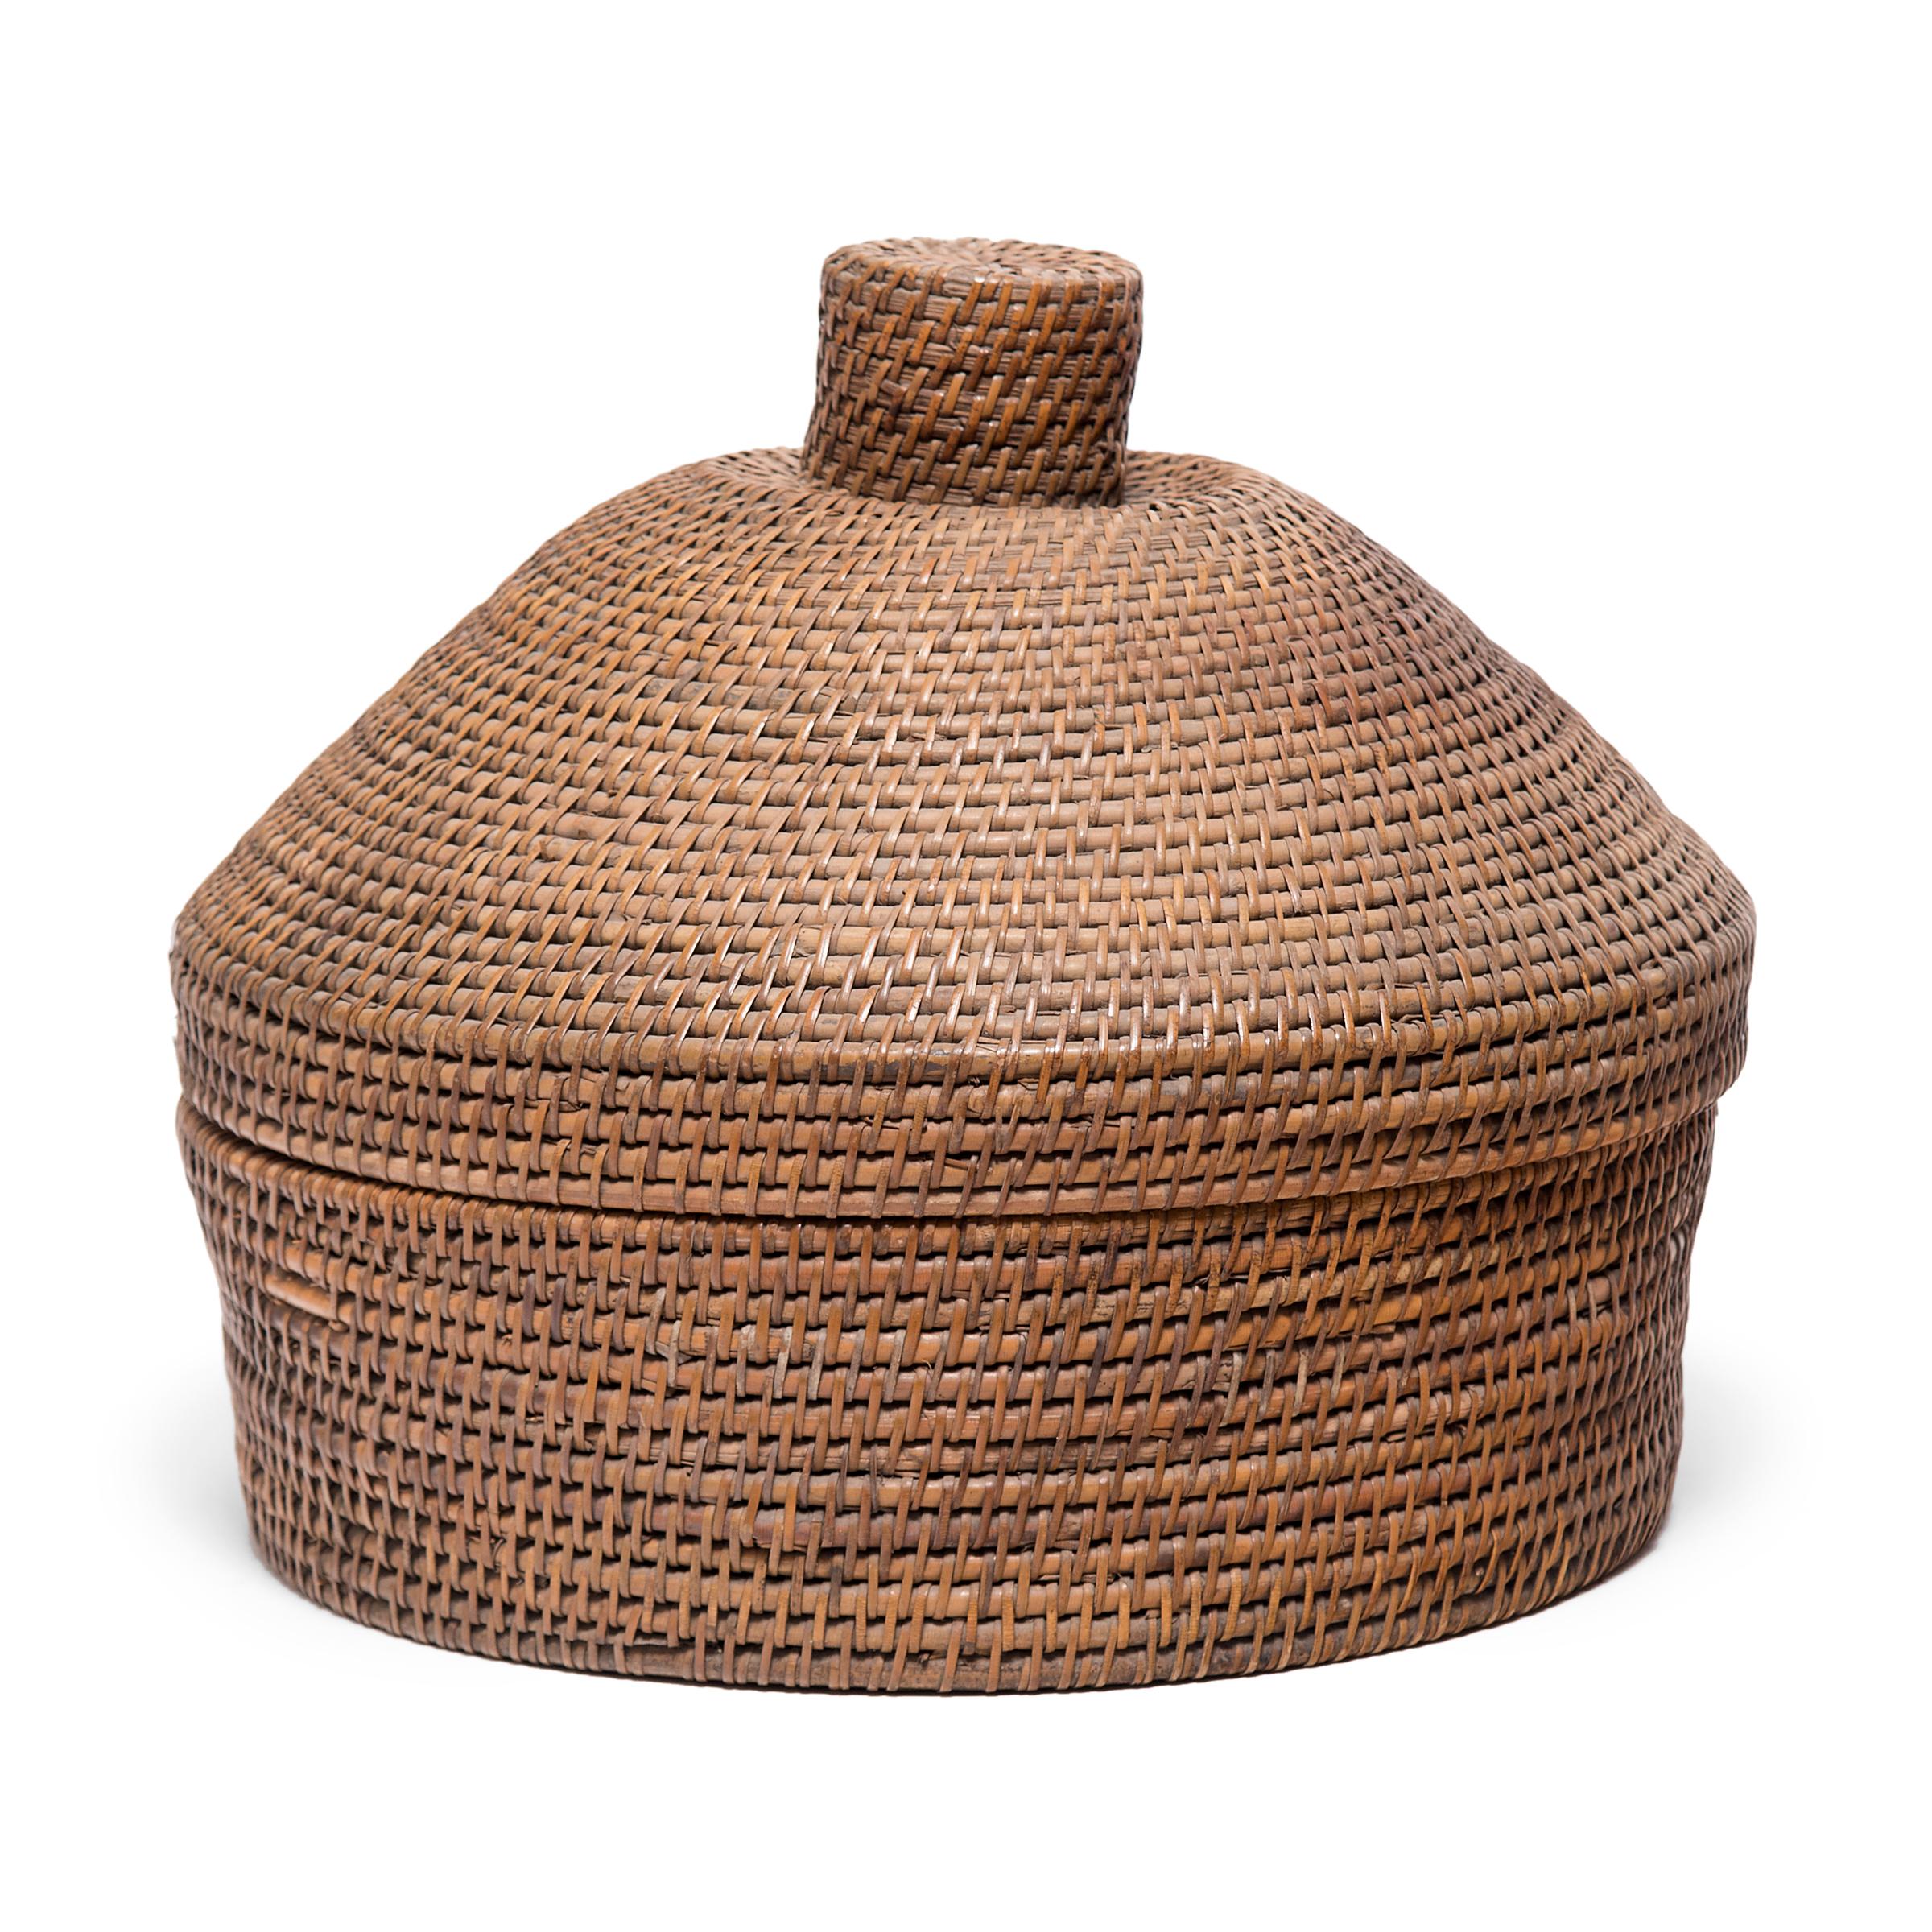 No self-respecting man in Qing-dynasty China would leave the house without some kind of hat. In fact, headgear was so central to social status that even the containers used to store one's hat were beautifully constructed.

The conical lid of this